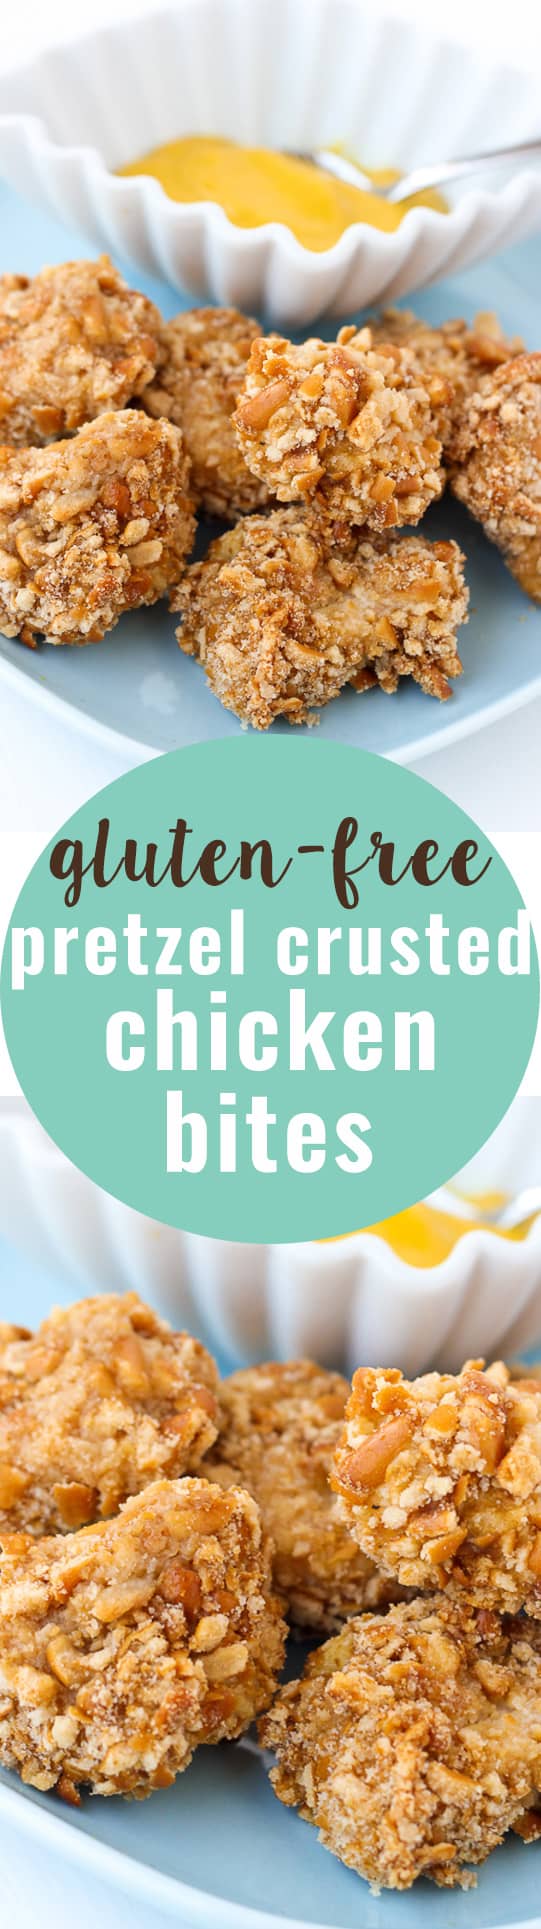 Gluten-Free Pretzel Crusted Chicken Bites! Quick, easy and so delicious you'd never guess they're gluten-free!